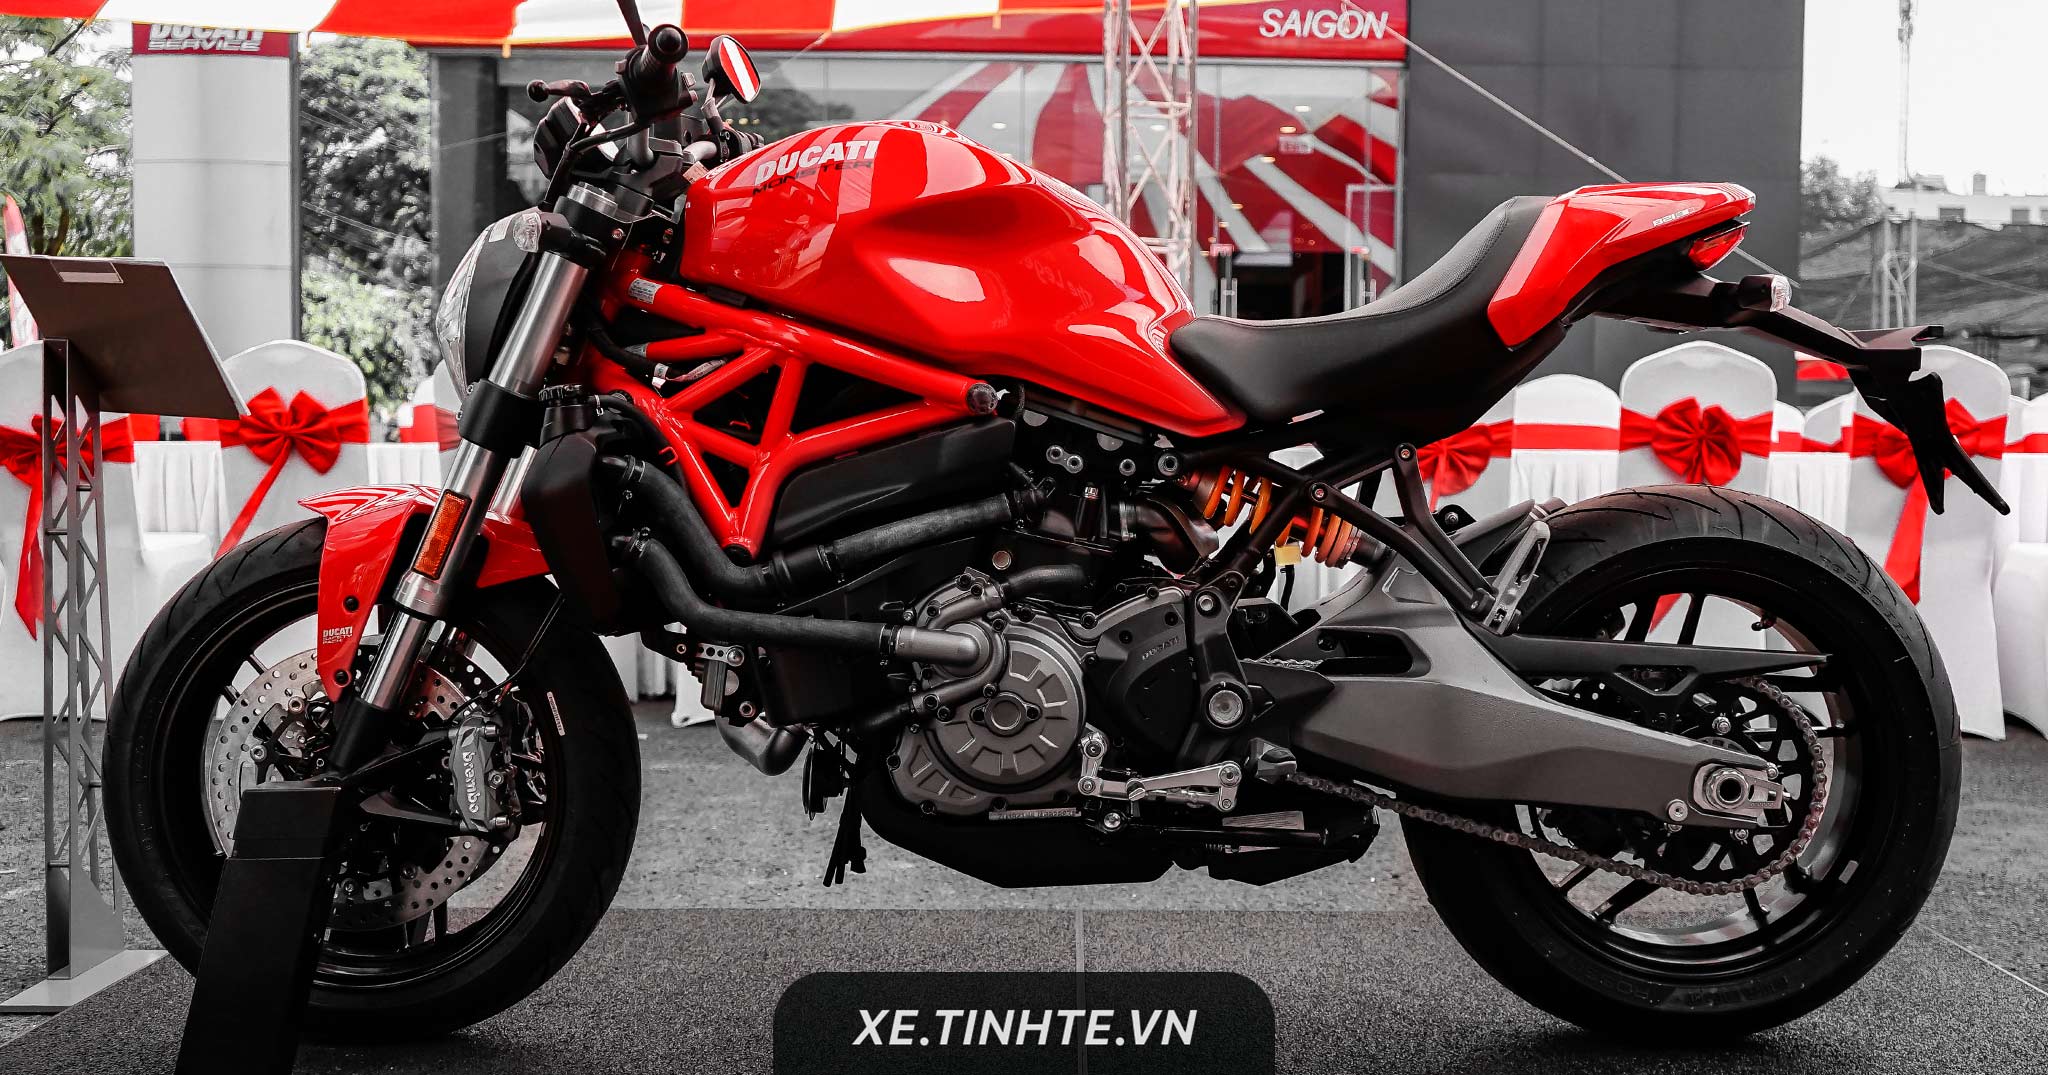 2020 Ducati Monster 821821 Stealth Buyers Guide Specs Photos Price   Cycle World